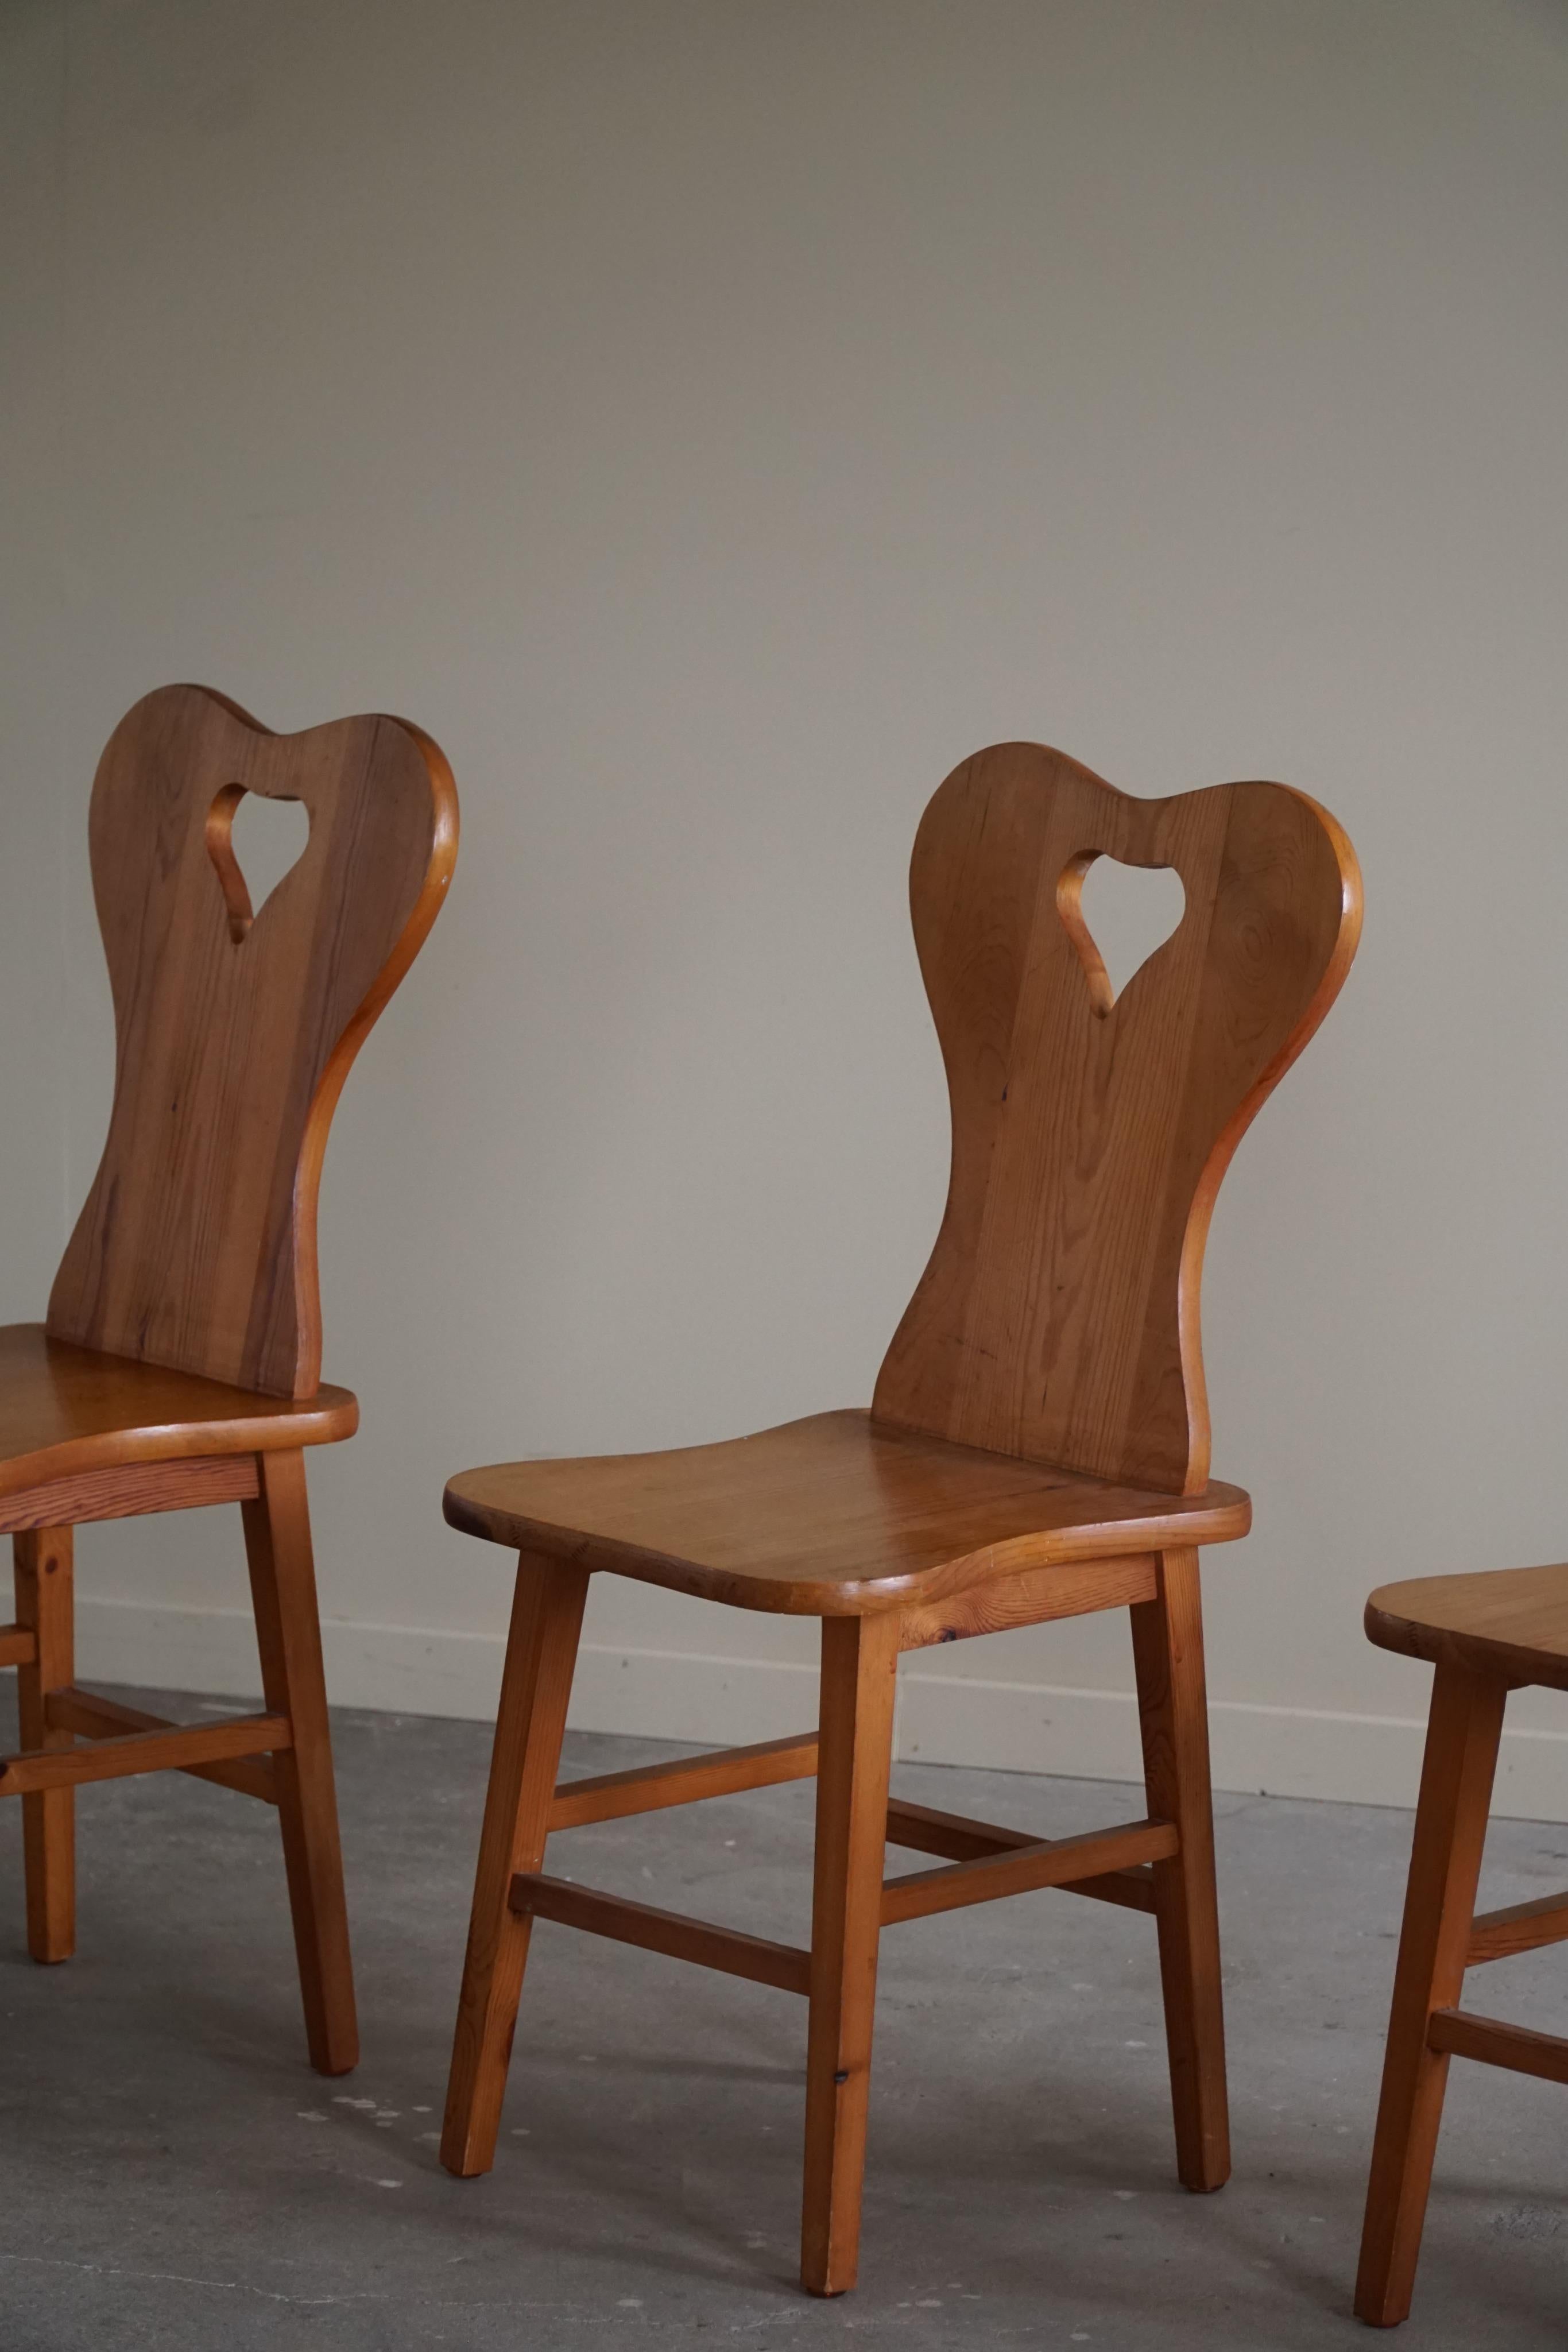 Set of 4 Chairs in Pine, by a Swedish Cabinetmaker, Scandinavian Modern, 1960s For Sale 3